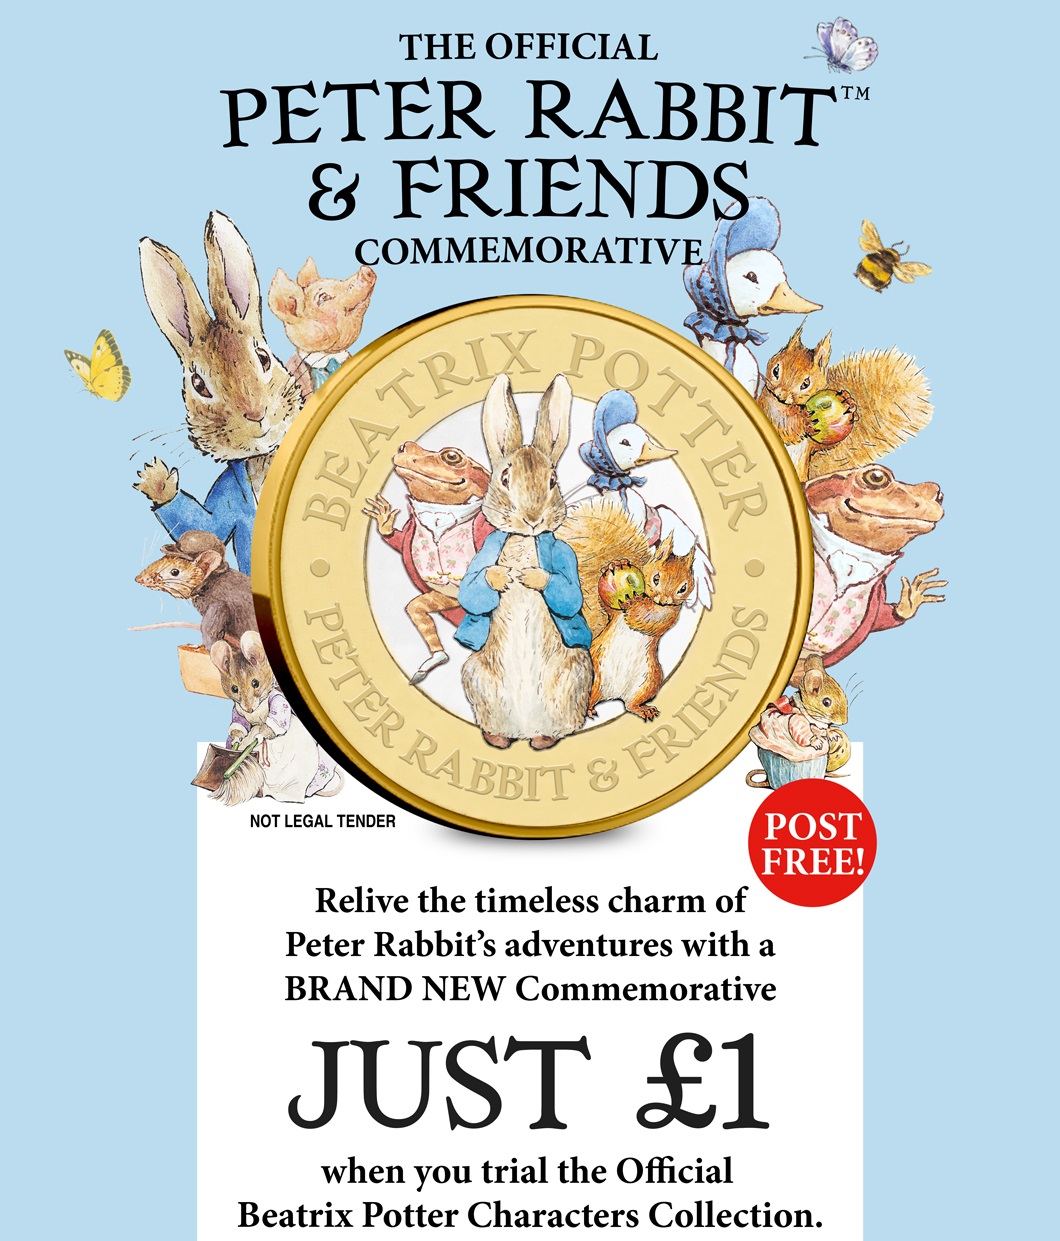 The Peter Rabbit and Friends Commemorative: Just £1 when you trial the Official Beatrix Potter Characters Collection